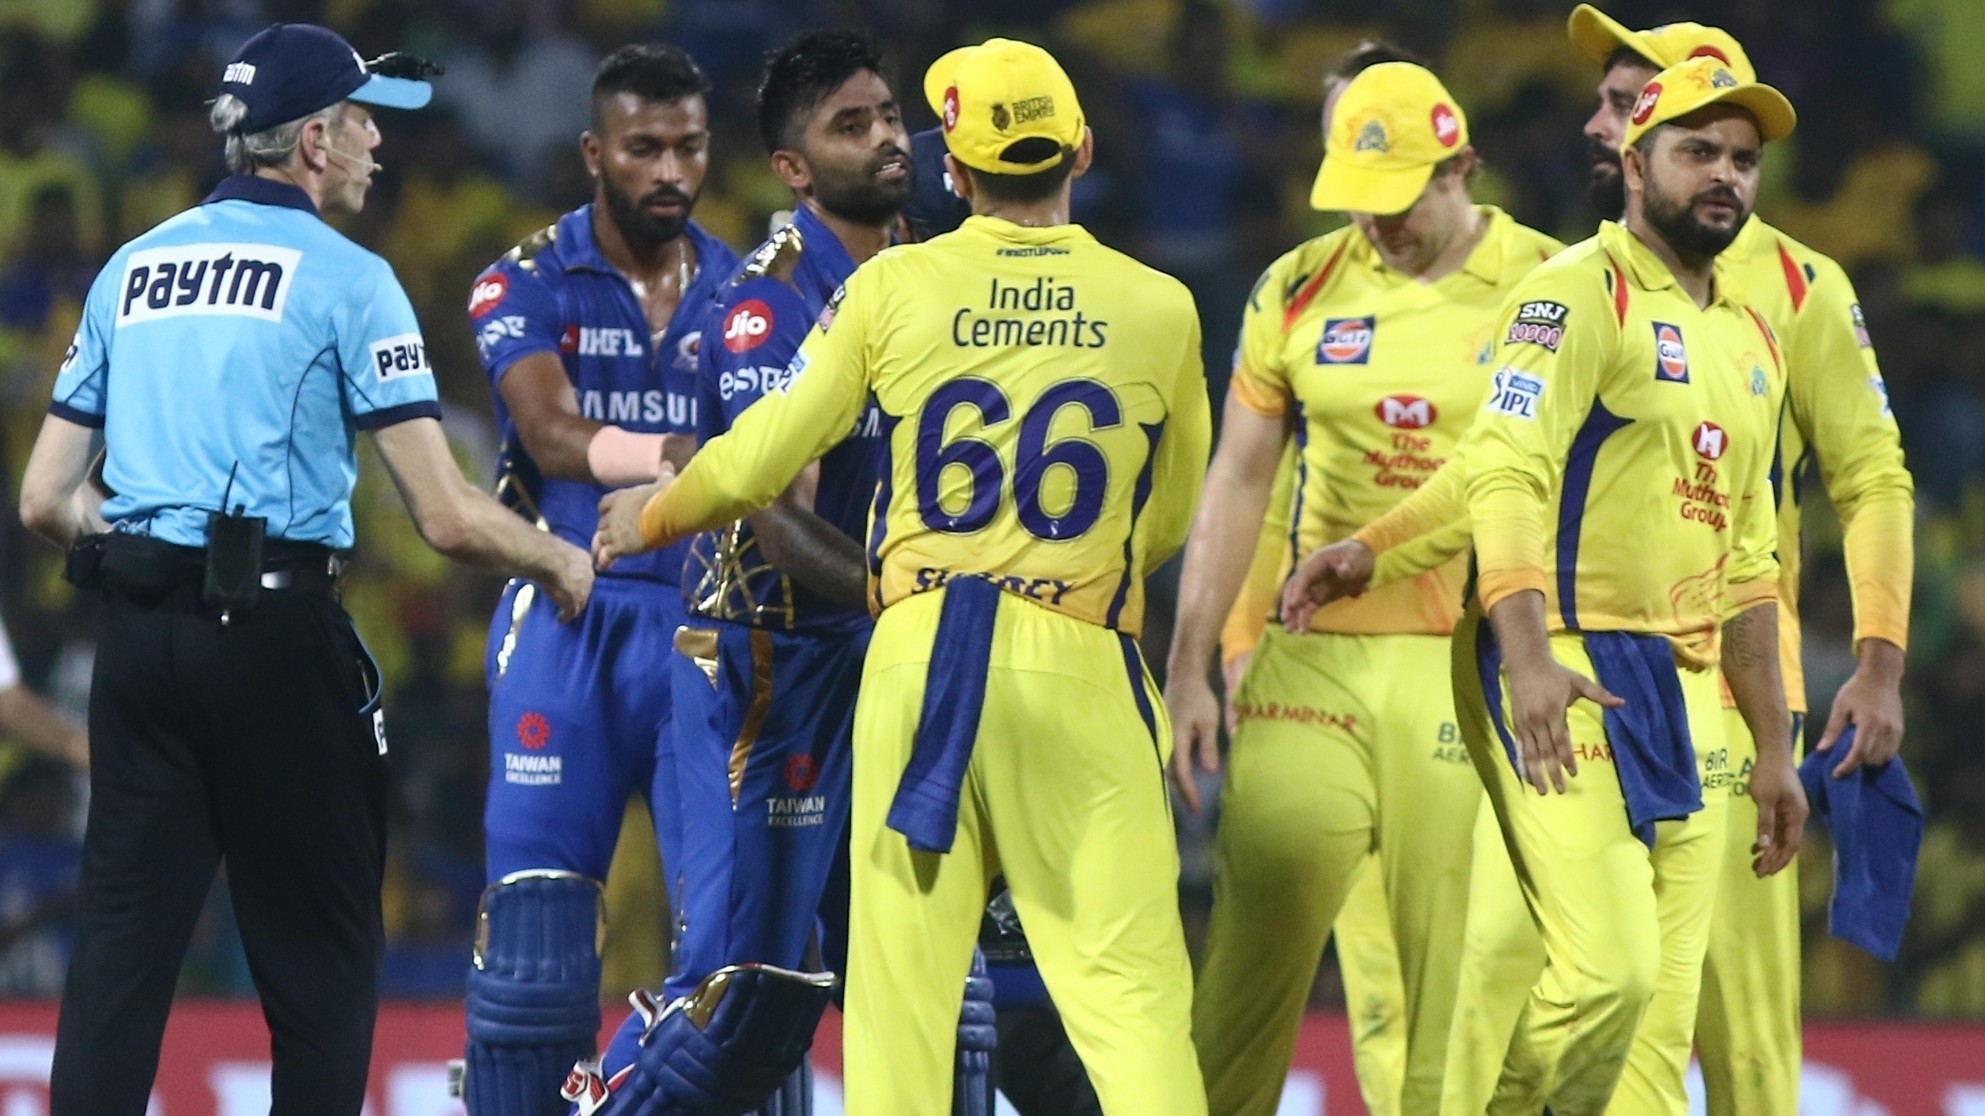 IPL 2020: Rigorous COVID-19 test, restricted movement among other things included in SOPs